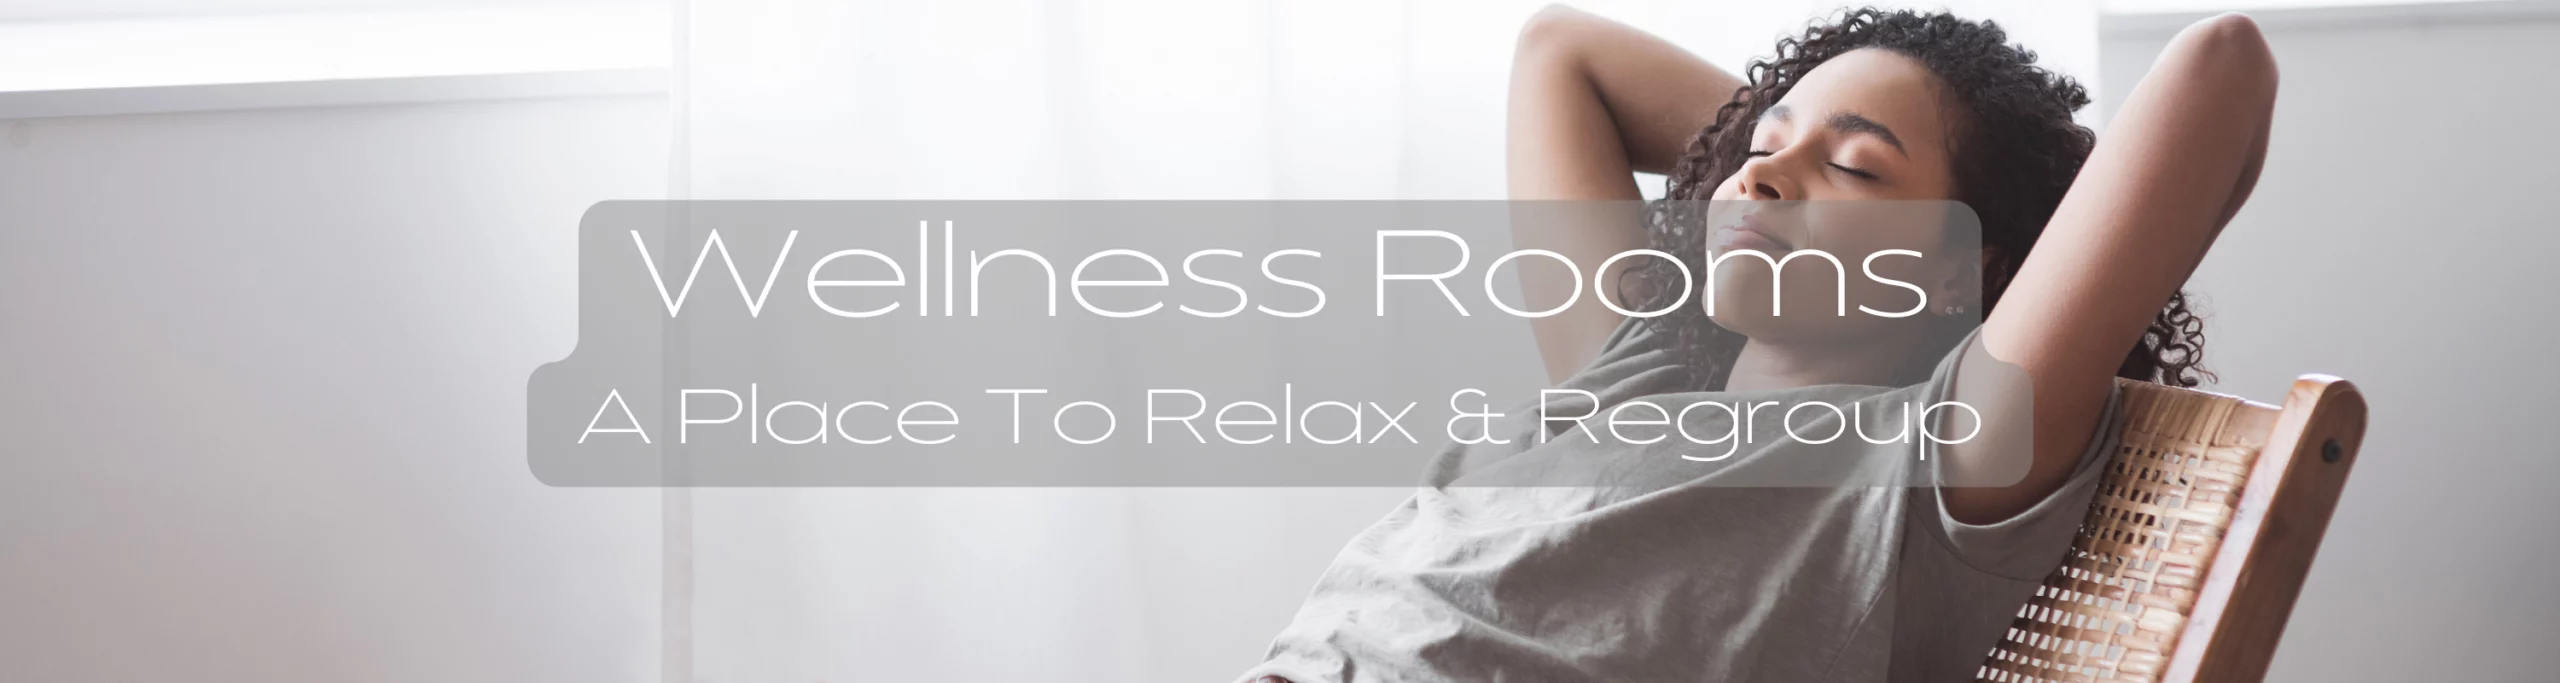 Wellness Rooms Time To Relax Banner